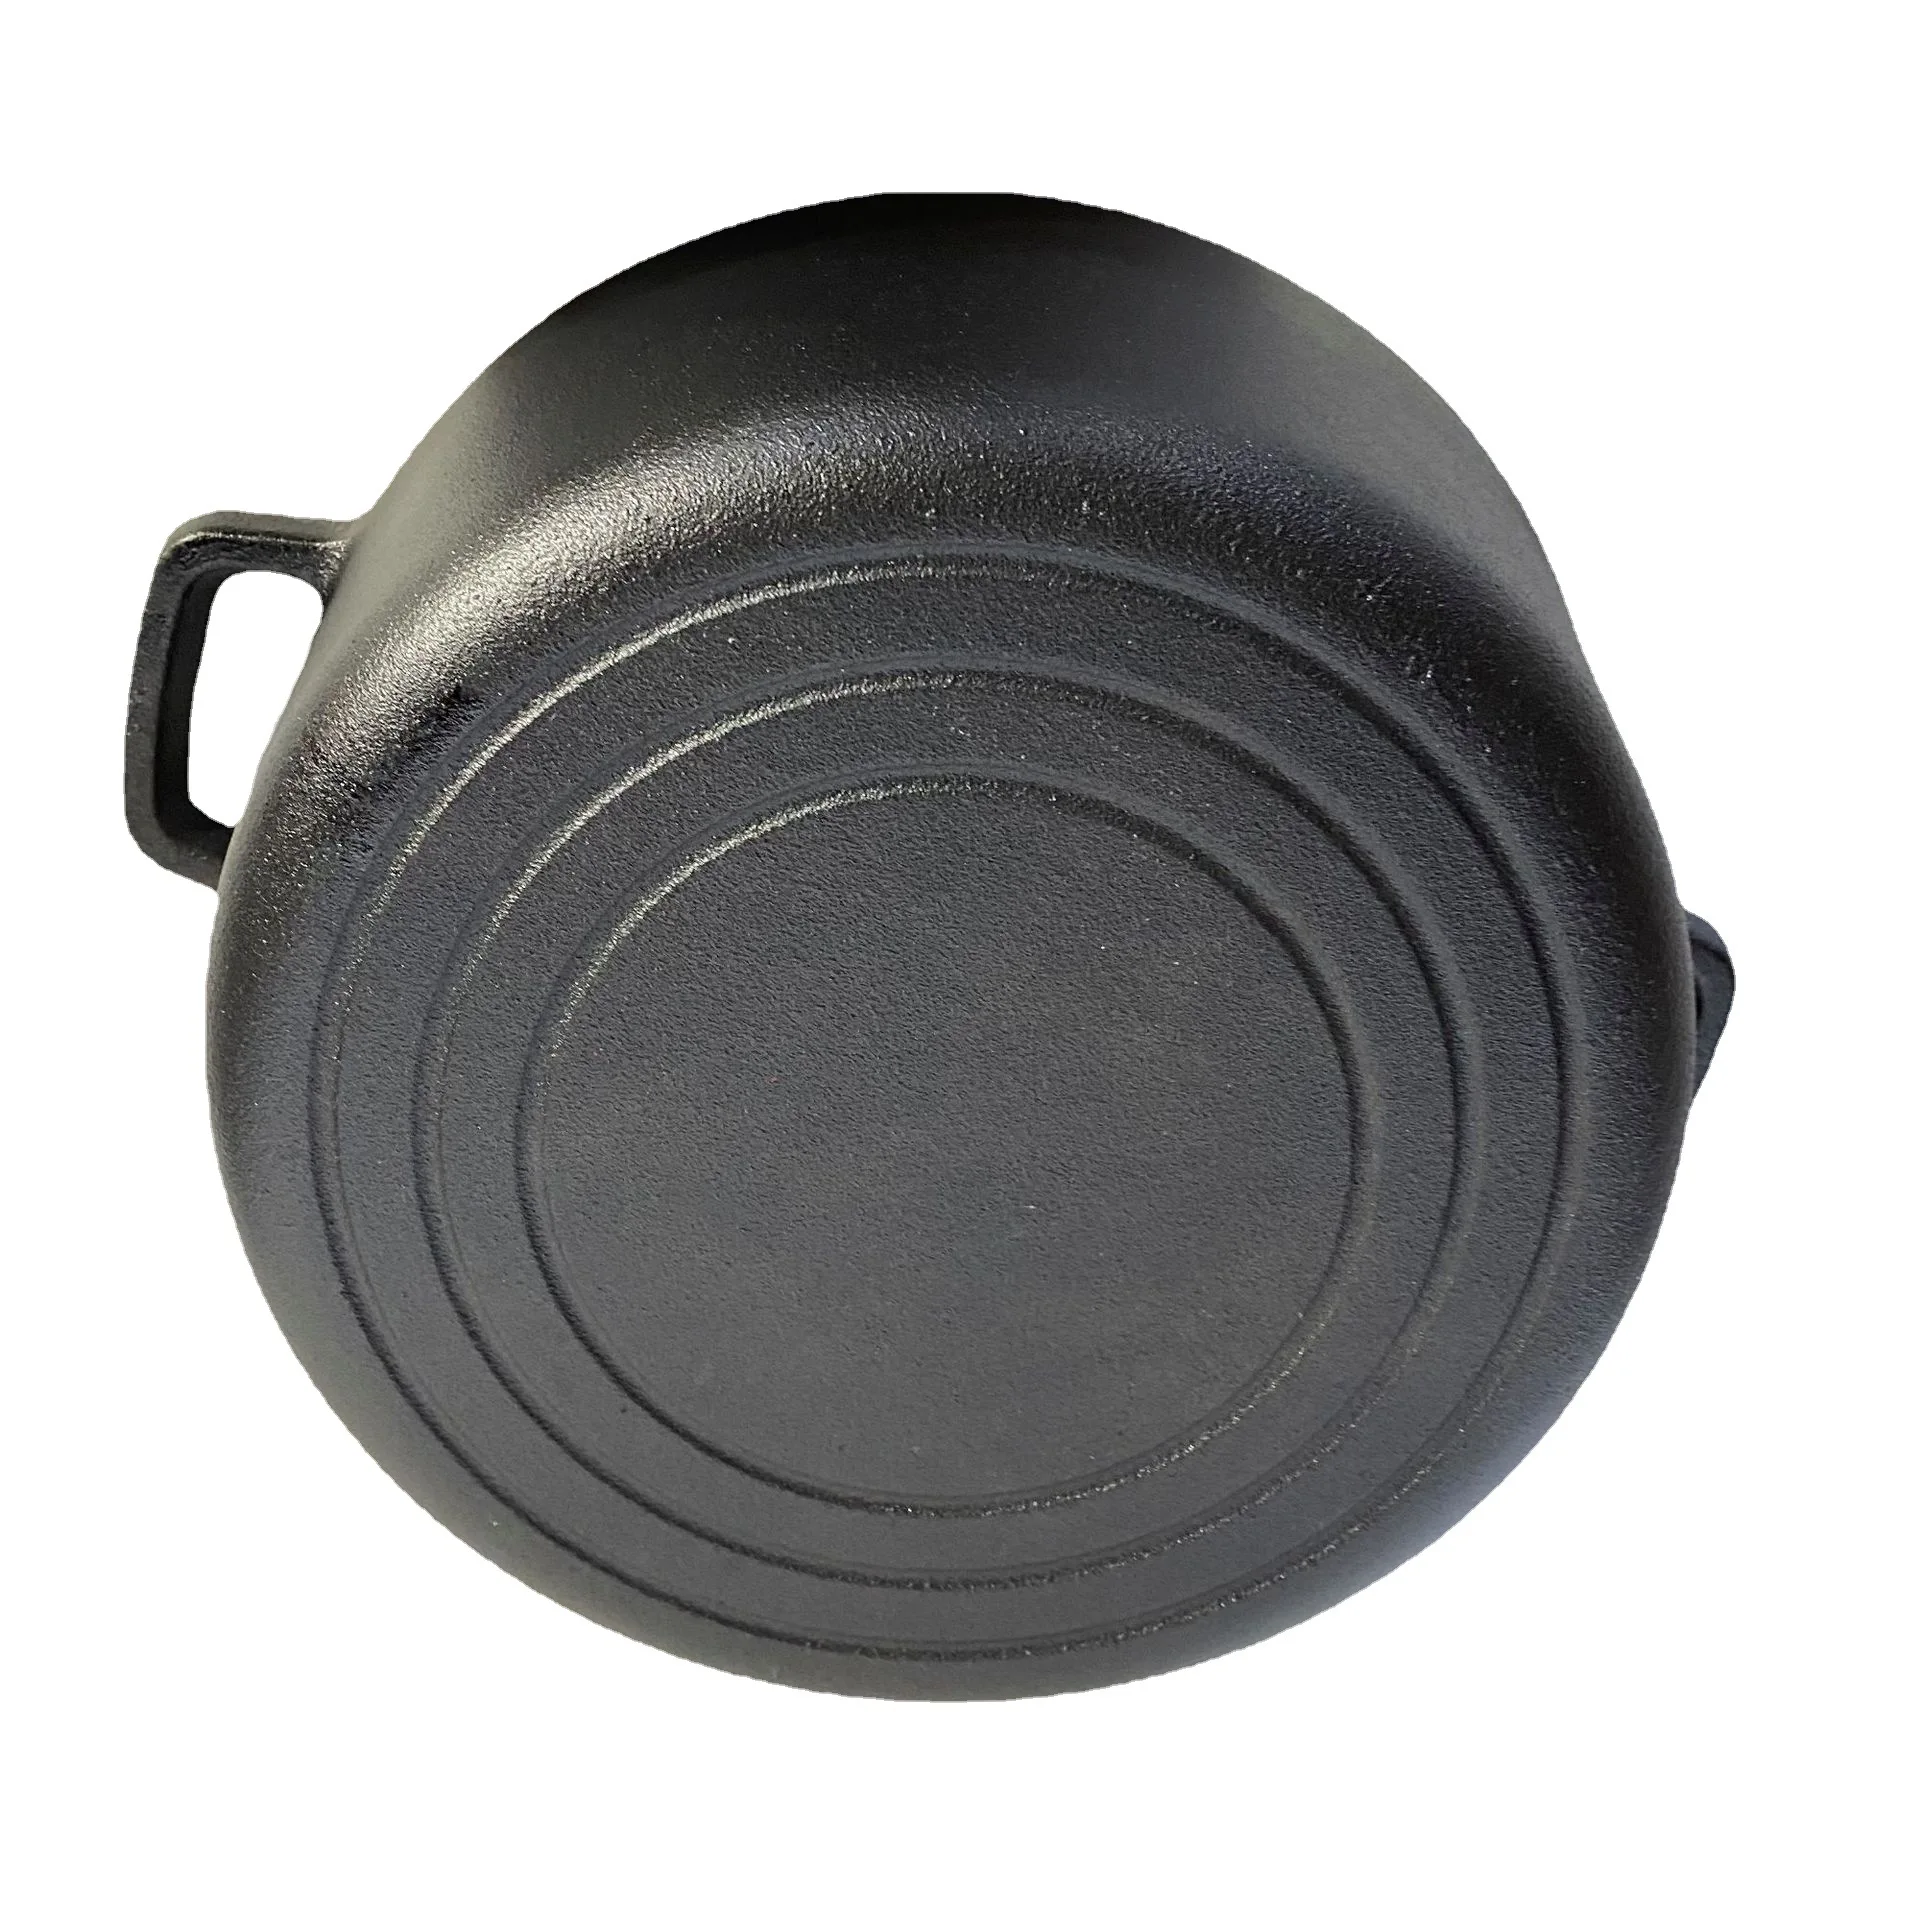 cooking pots chefmate Pre-seasoned double-purpose cast iron casserole with cast iron fry pan lid dutch oven